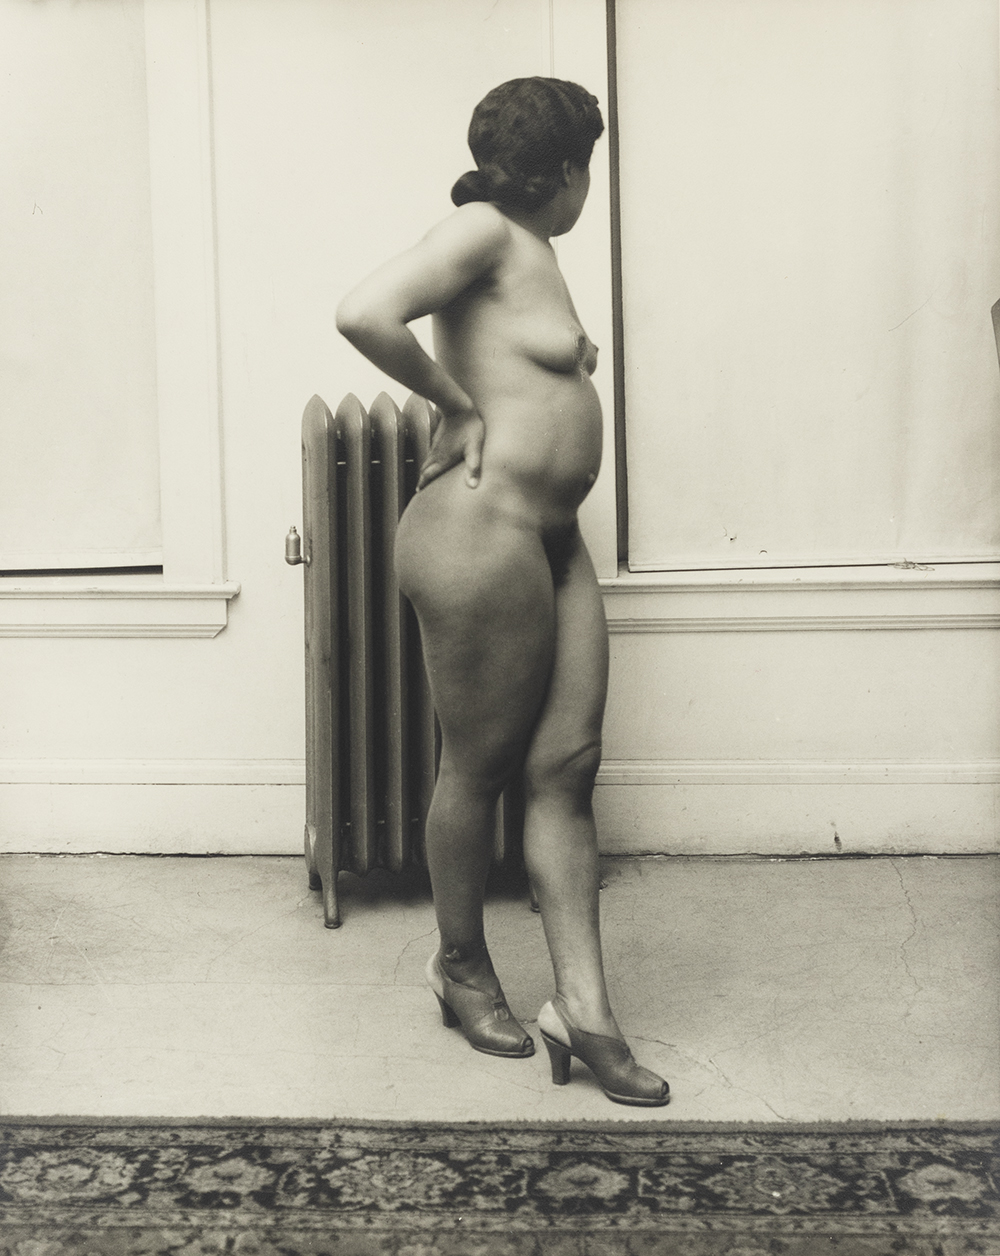 Photograph of a nude Black woman turned in profile standing in a sparse room in front of a hot water radiator